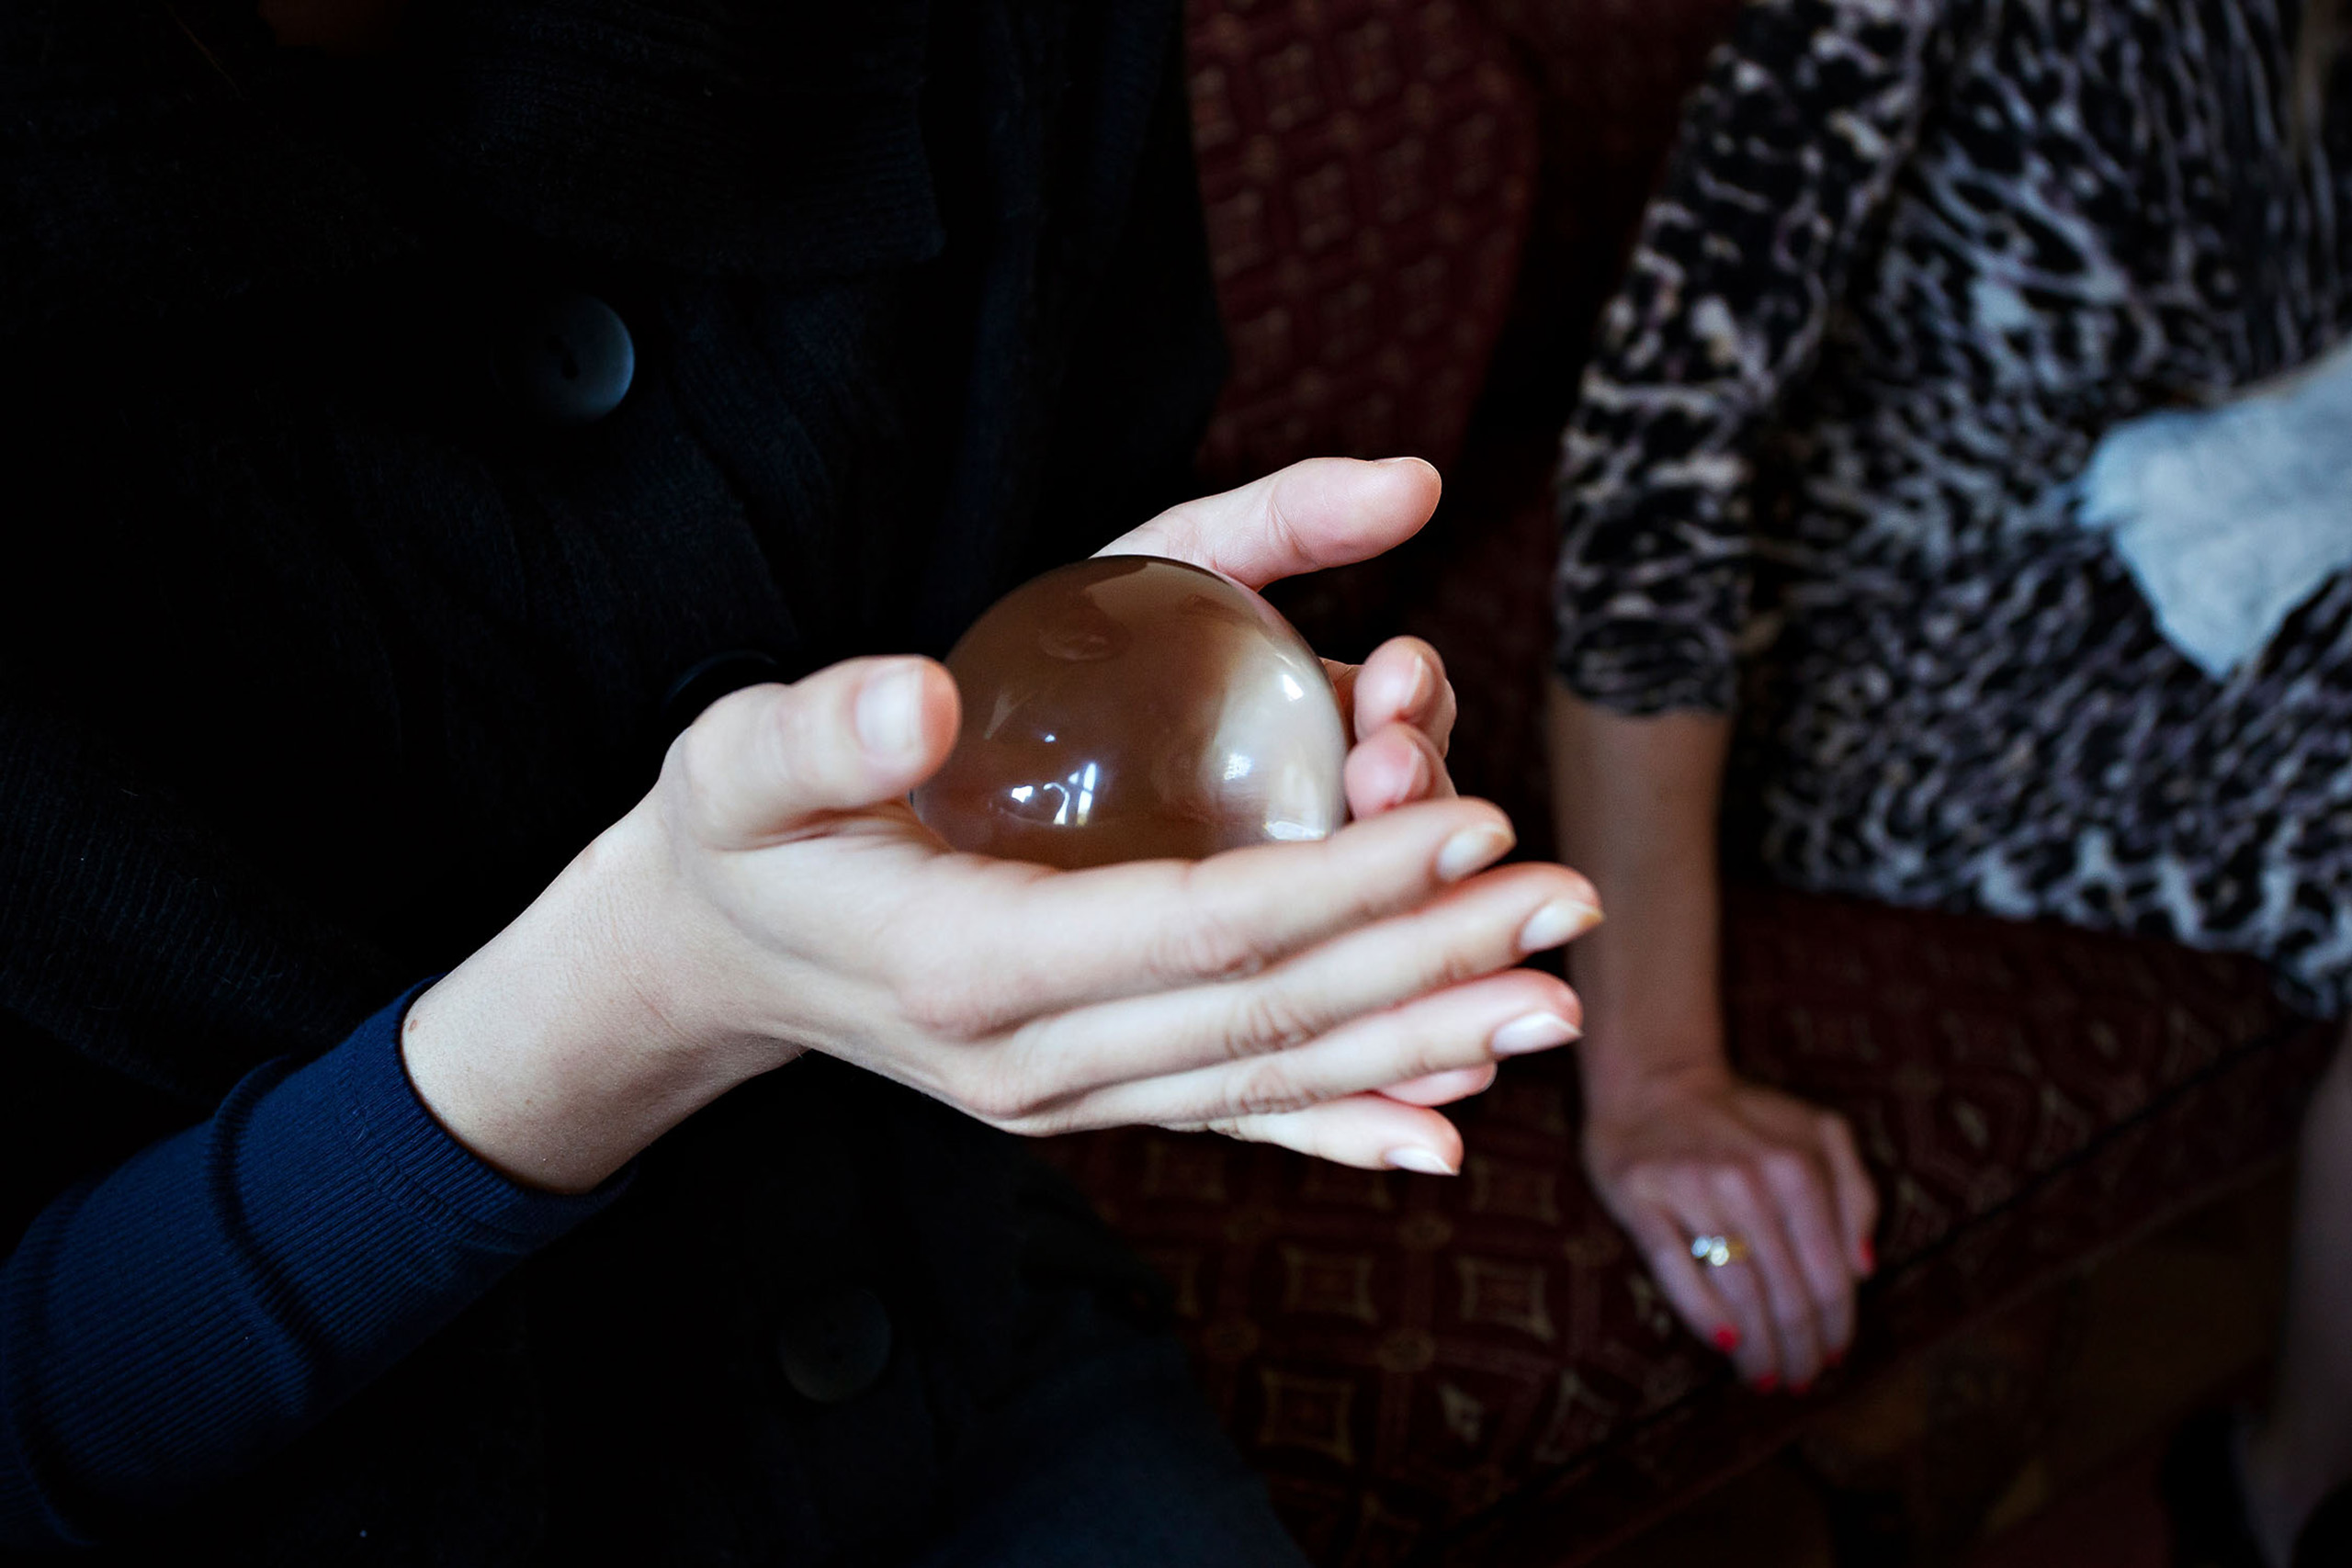 Helen Duncan's crystal ball, Arthur Findlay College, Stansted, England, 2012.